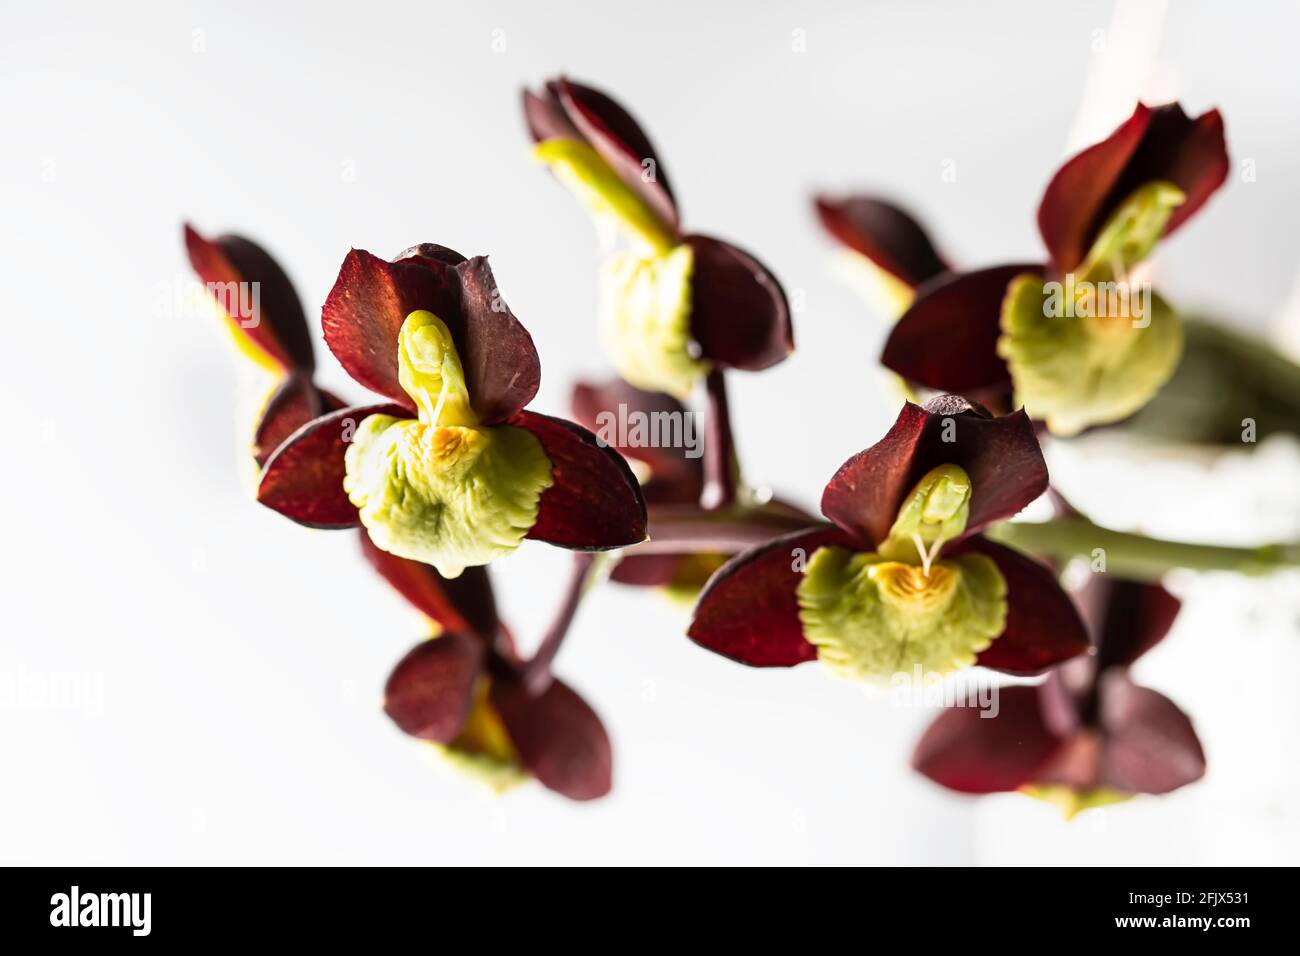 Orchid. Catasetum hybrid on white background. Catasetum tenebrosum. A photo of a stunning almost black orchid hybrid. Selective focus Stock Photo